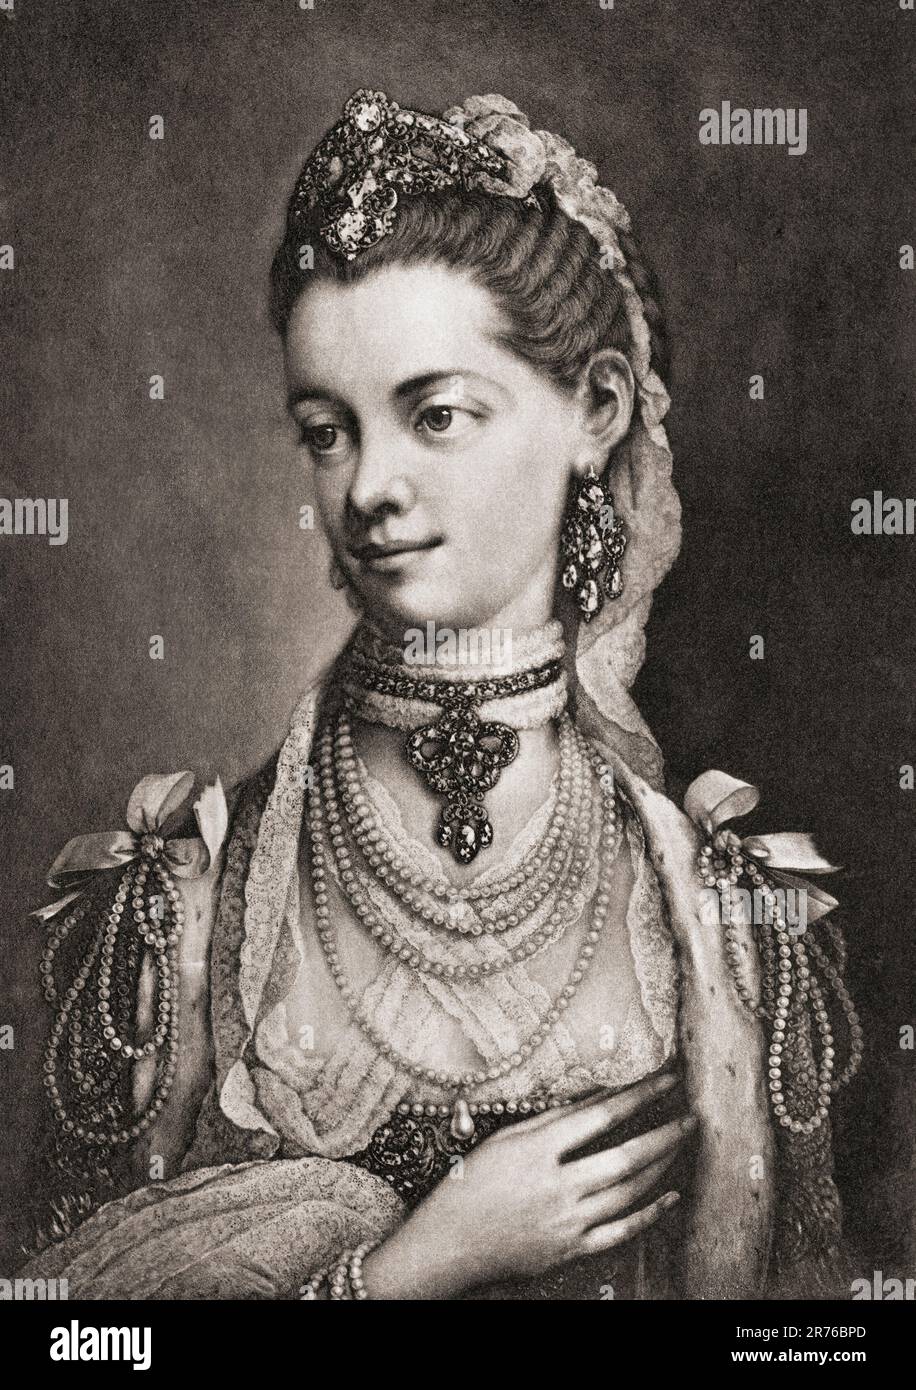 Charlotte of Mecklenburg-Strelitz, 1744 – 1818.  Queen of Great Britain and Ireland as the wife of King George III.  From Mezzotints, published 1904. Stock Photo